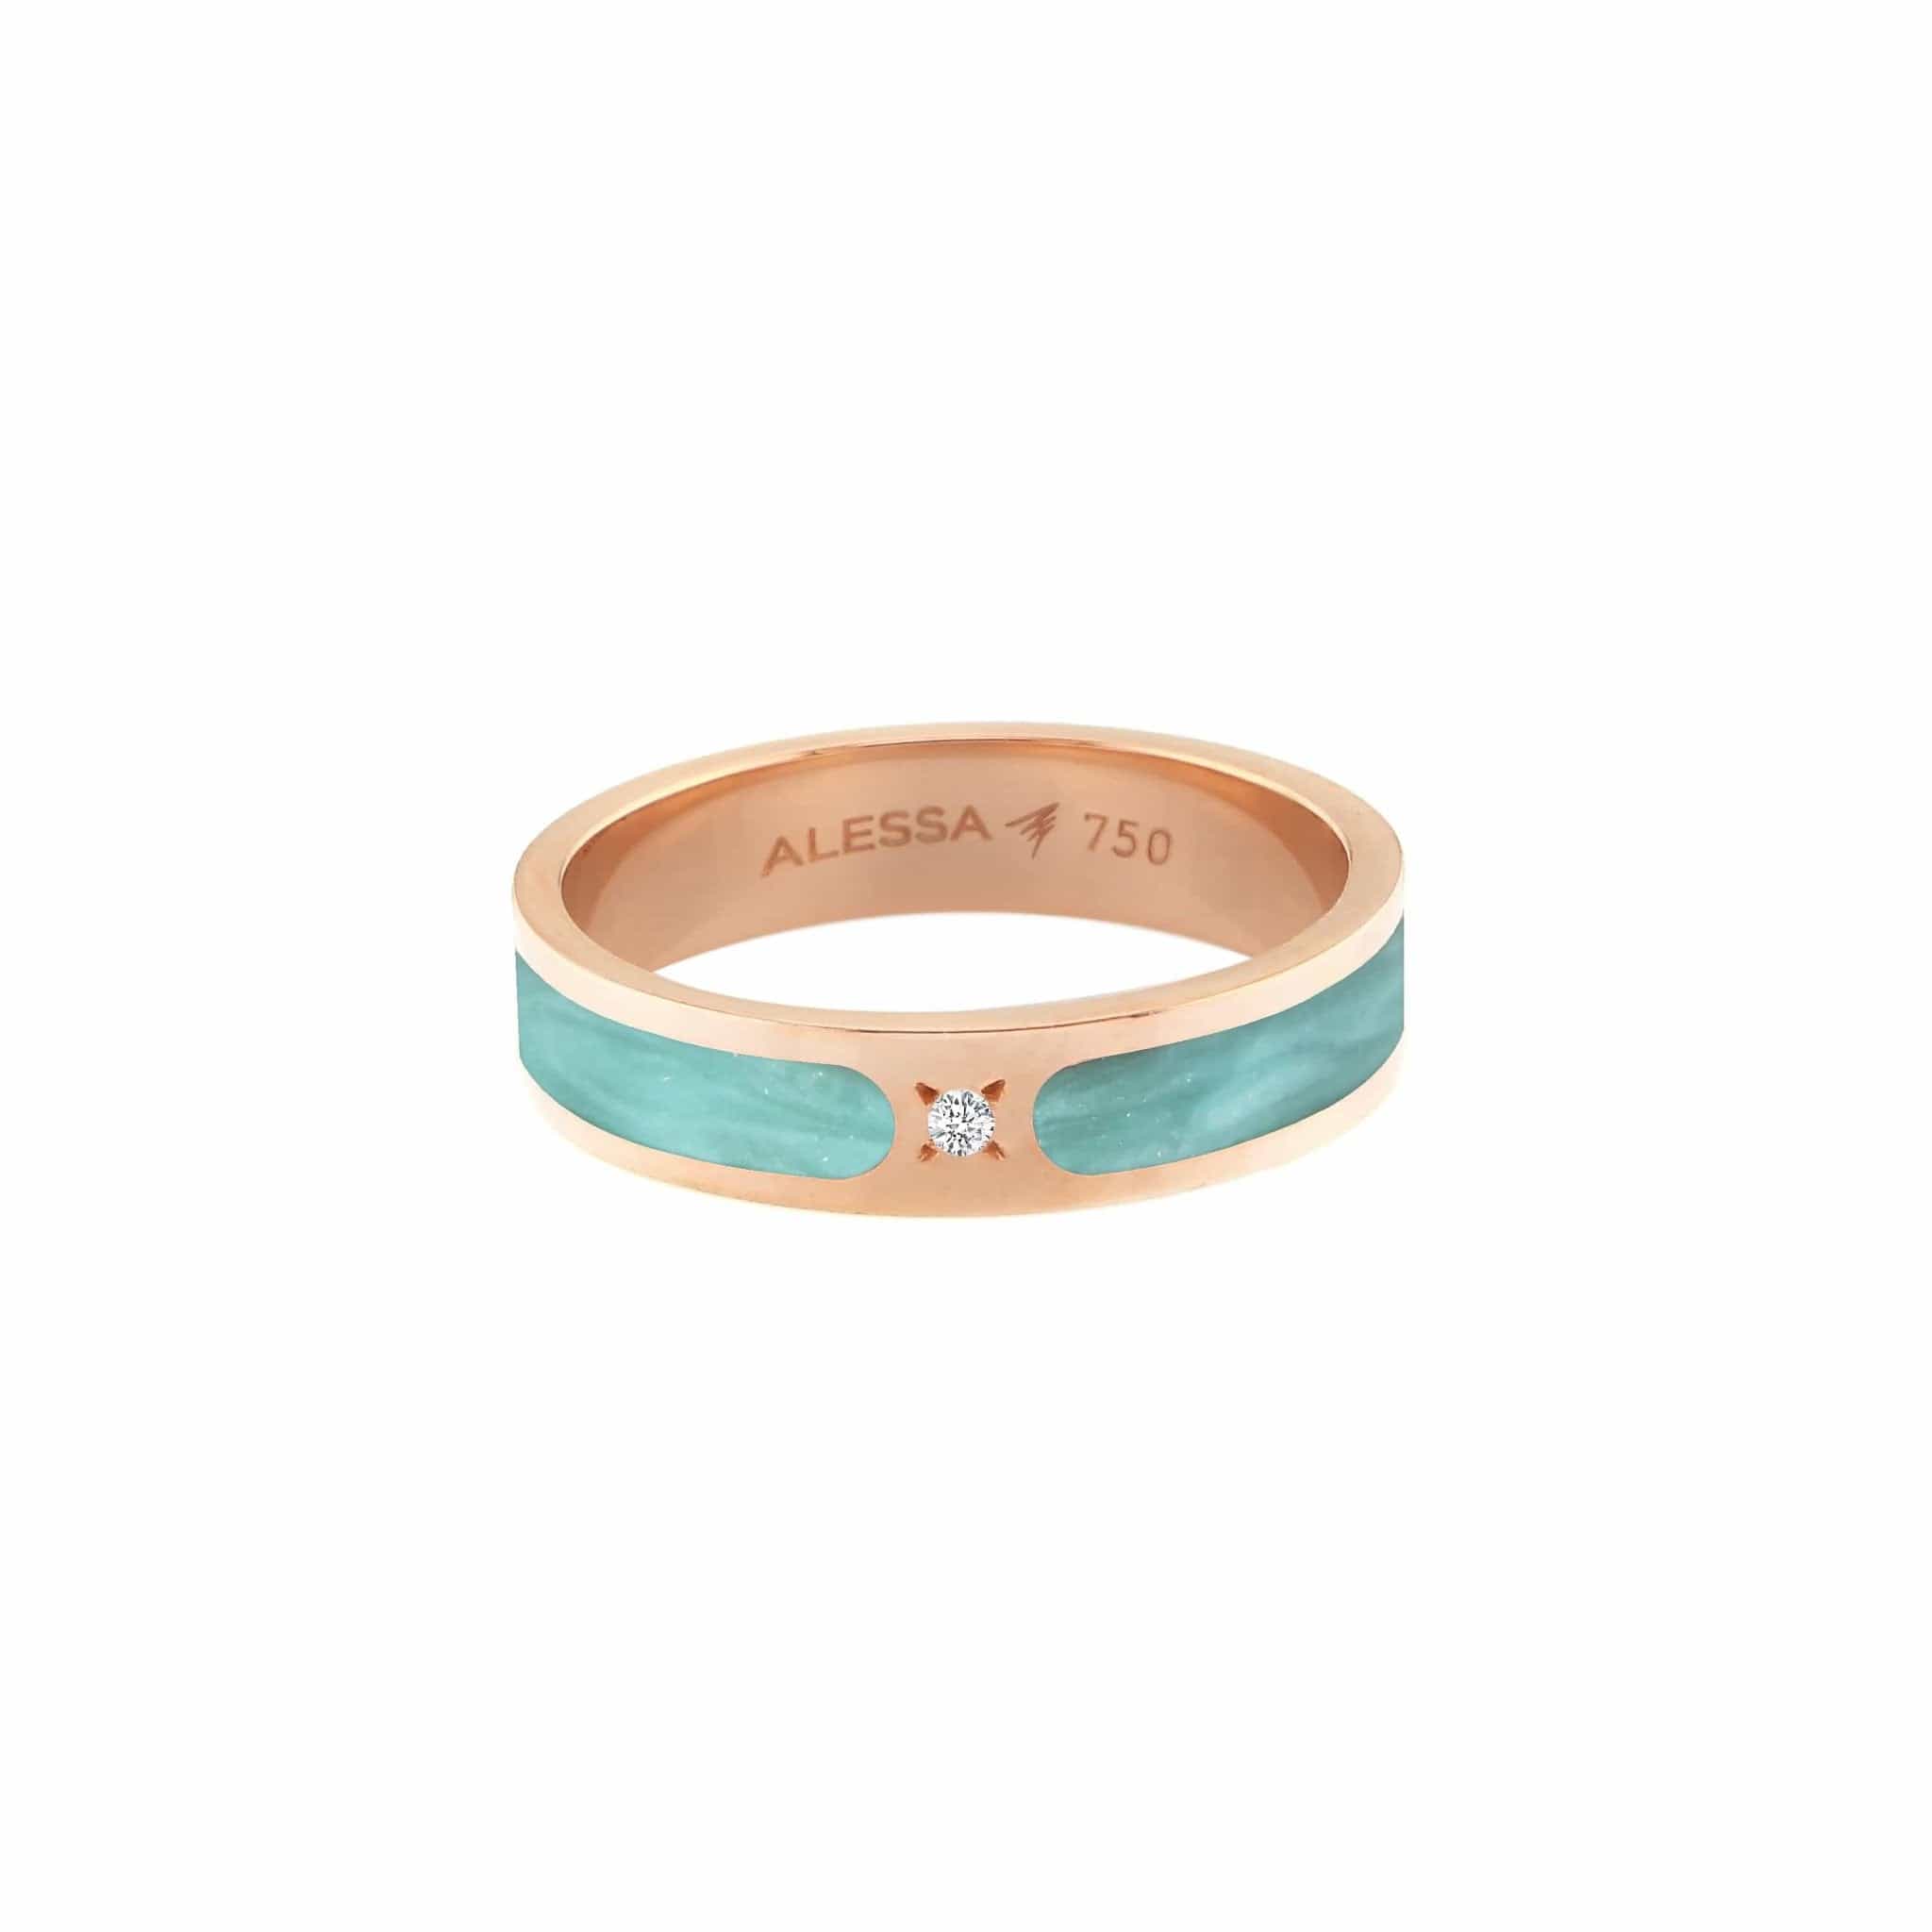 Alessa Jewelry Rose Gold Spectrum Hand Painted Ring - M.Fitaihi